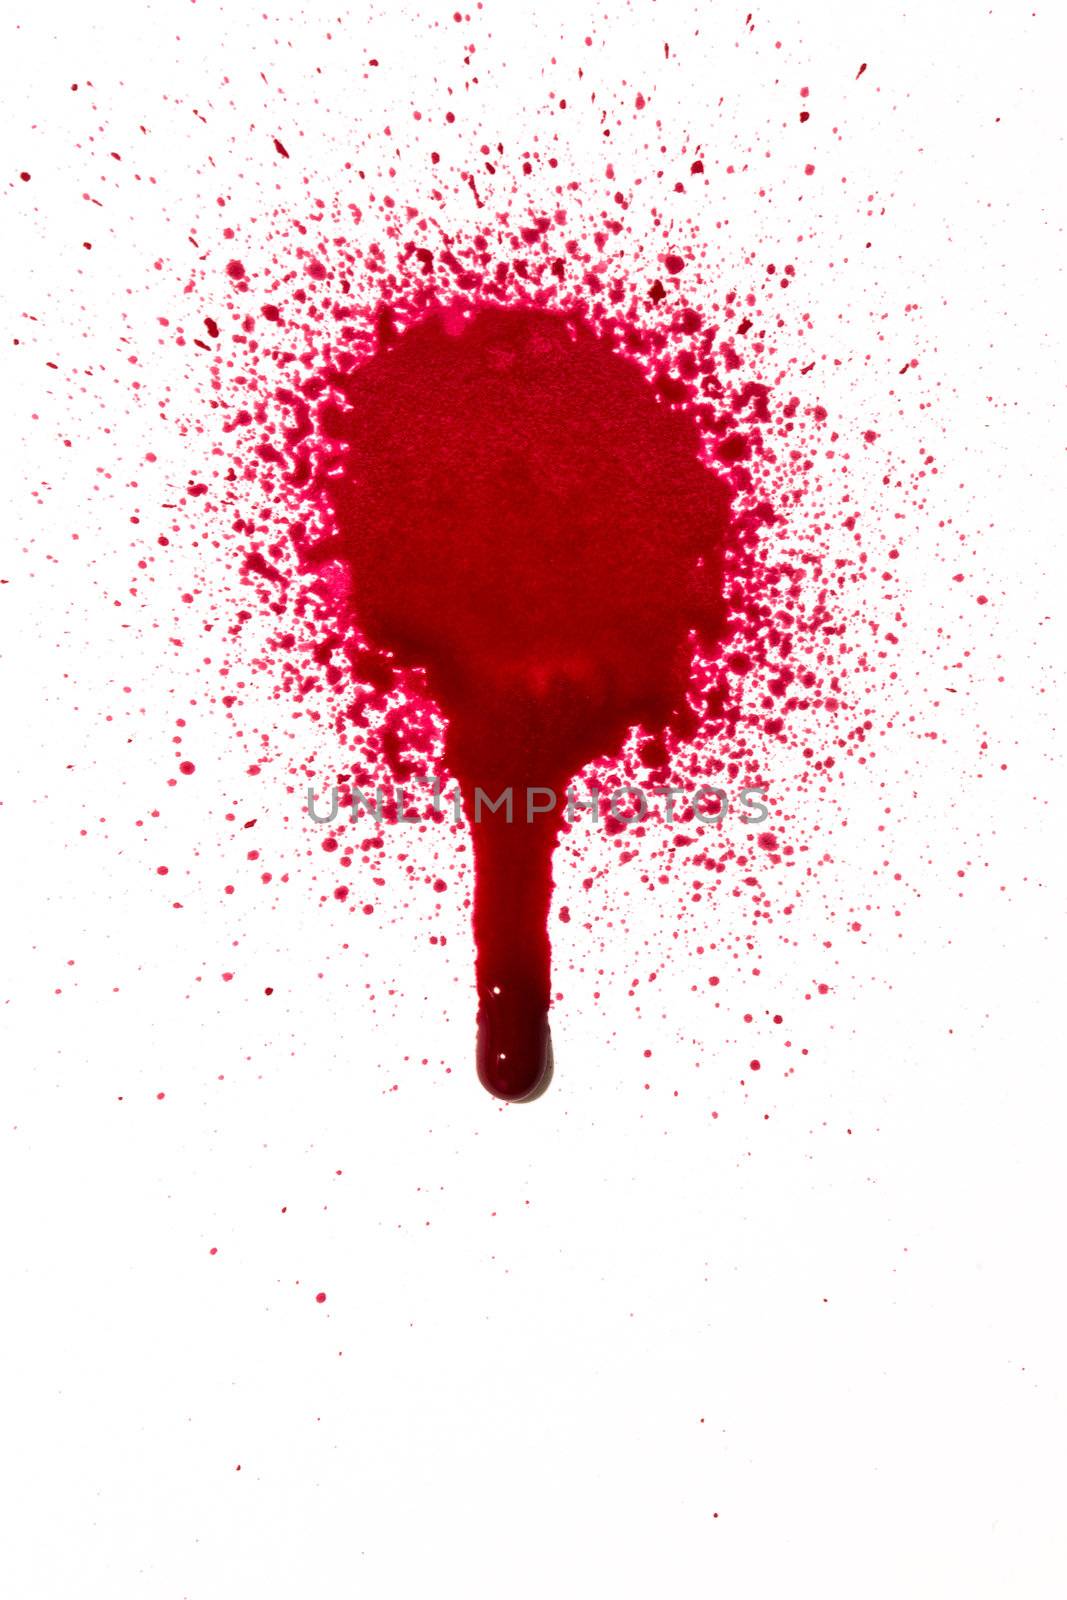 Blood or paint drips and splats by jamenpercy